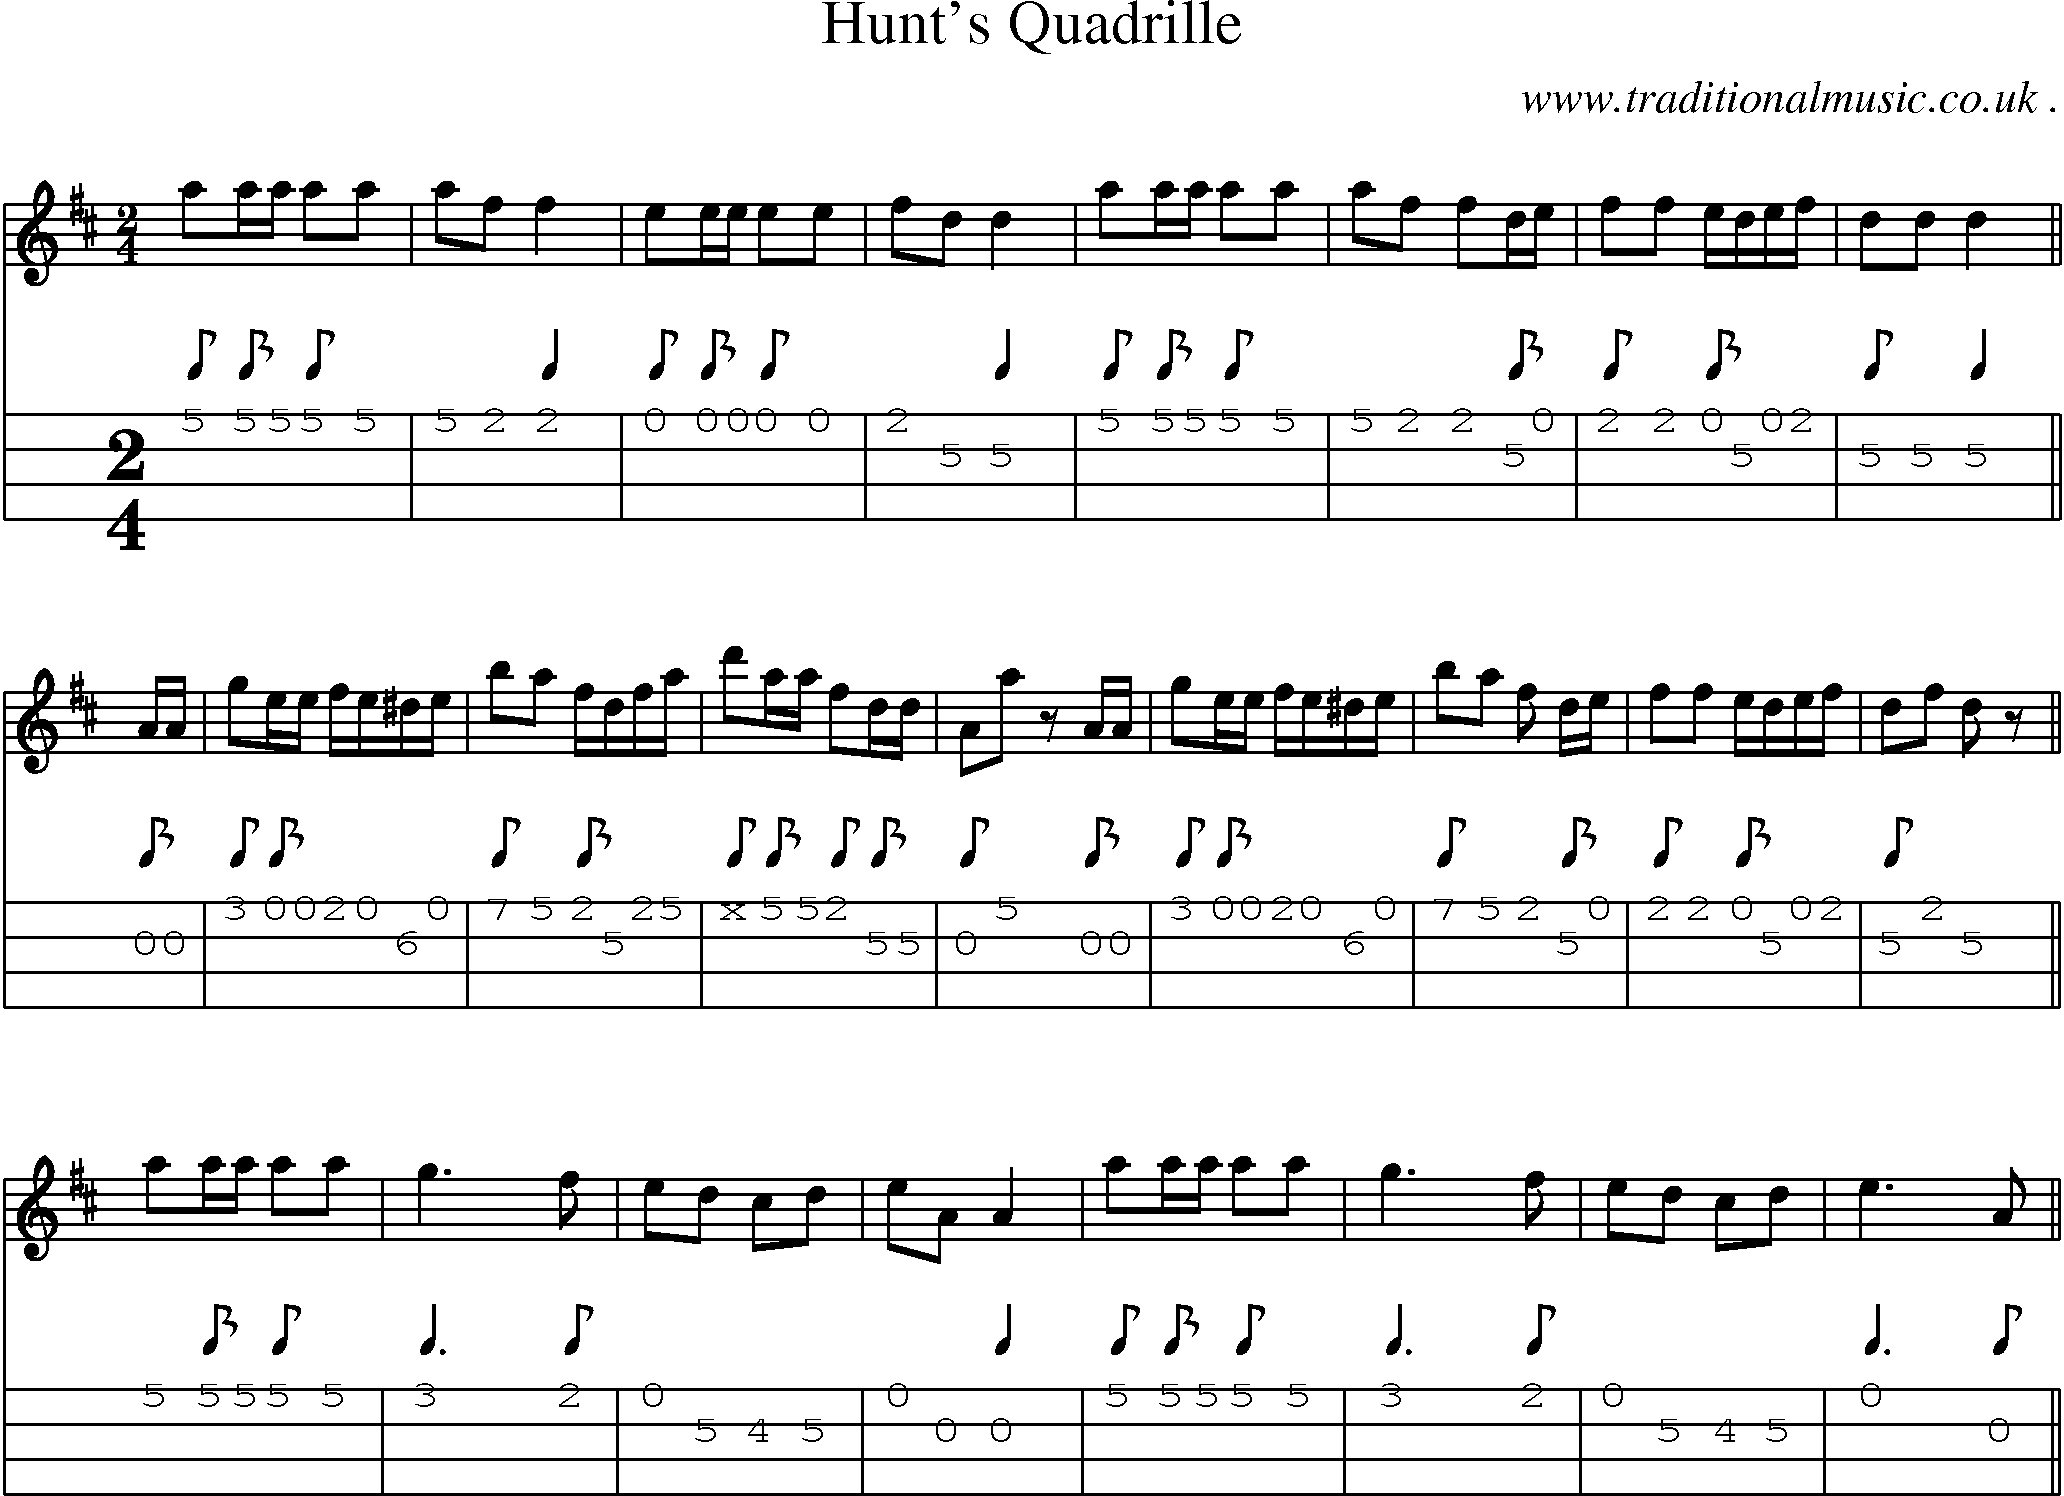 Sheet-Music and Mandolin Tabs for Hunts Quadrille